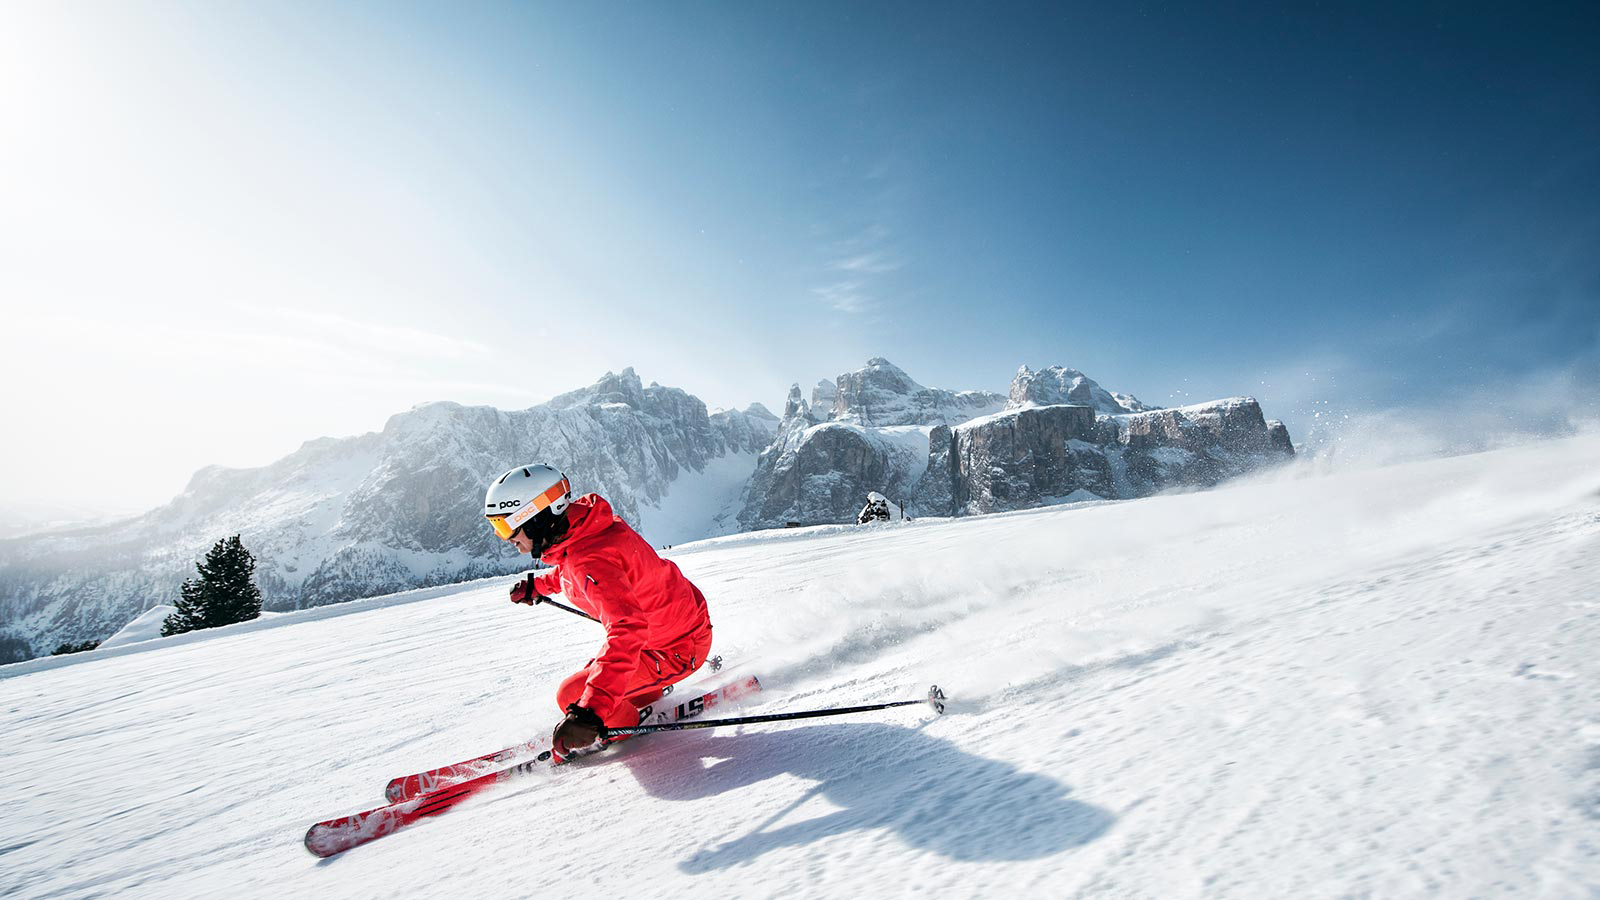 A skier descends fast on the slopes with the Dolomites in the background